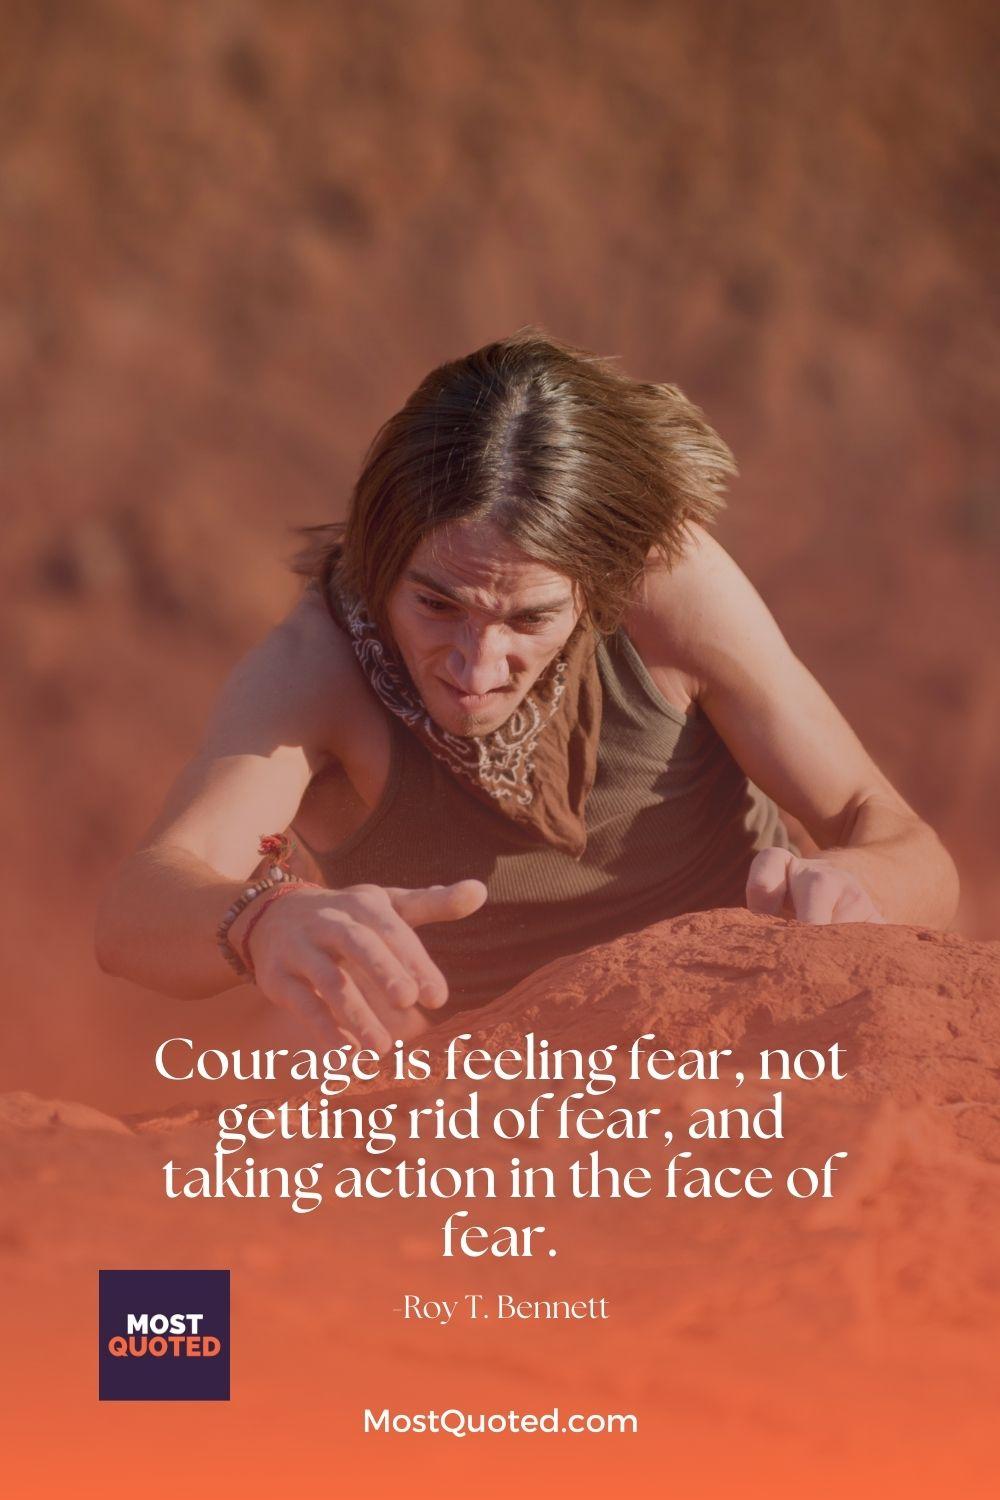 Courage is feeling fear, not getting rid of fear, and taking action in the face of fear. - Roy T. Bennett